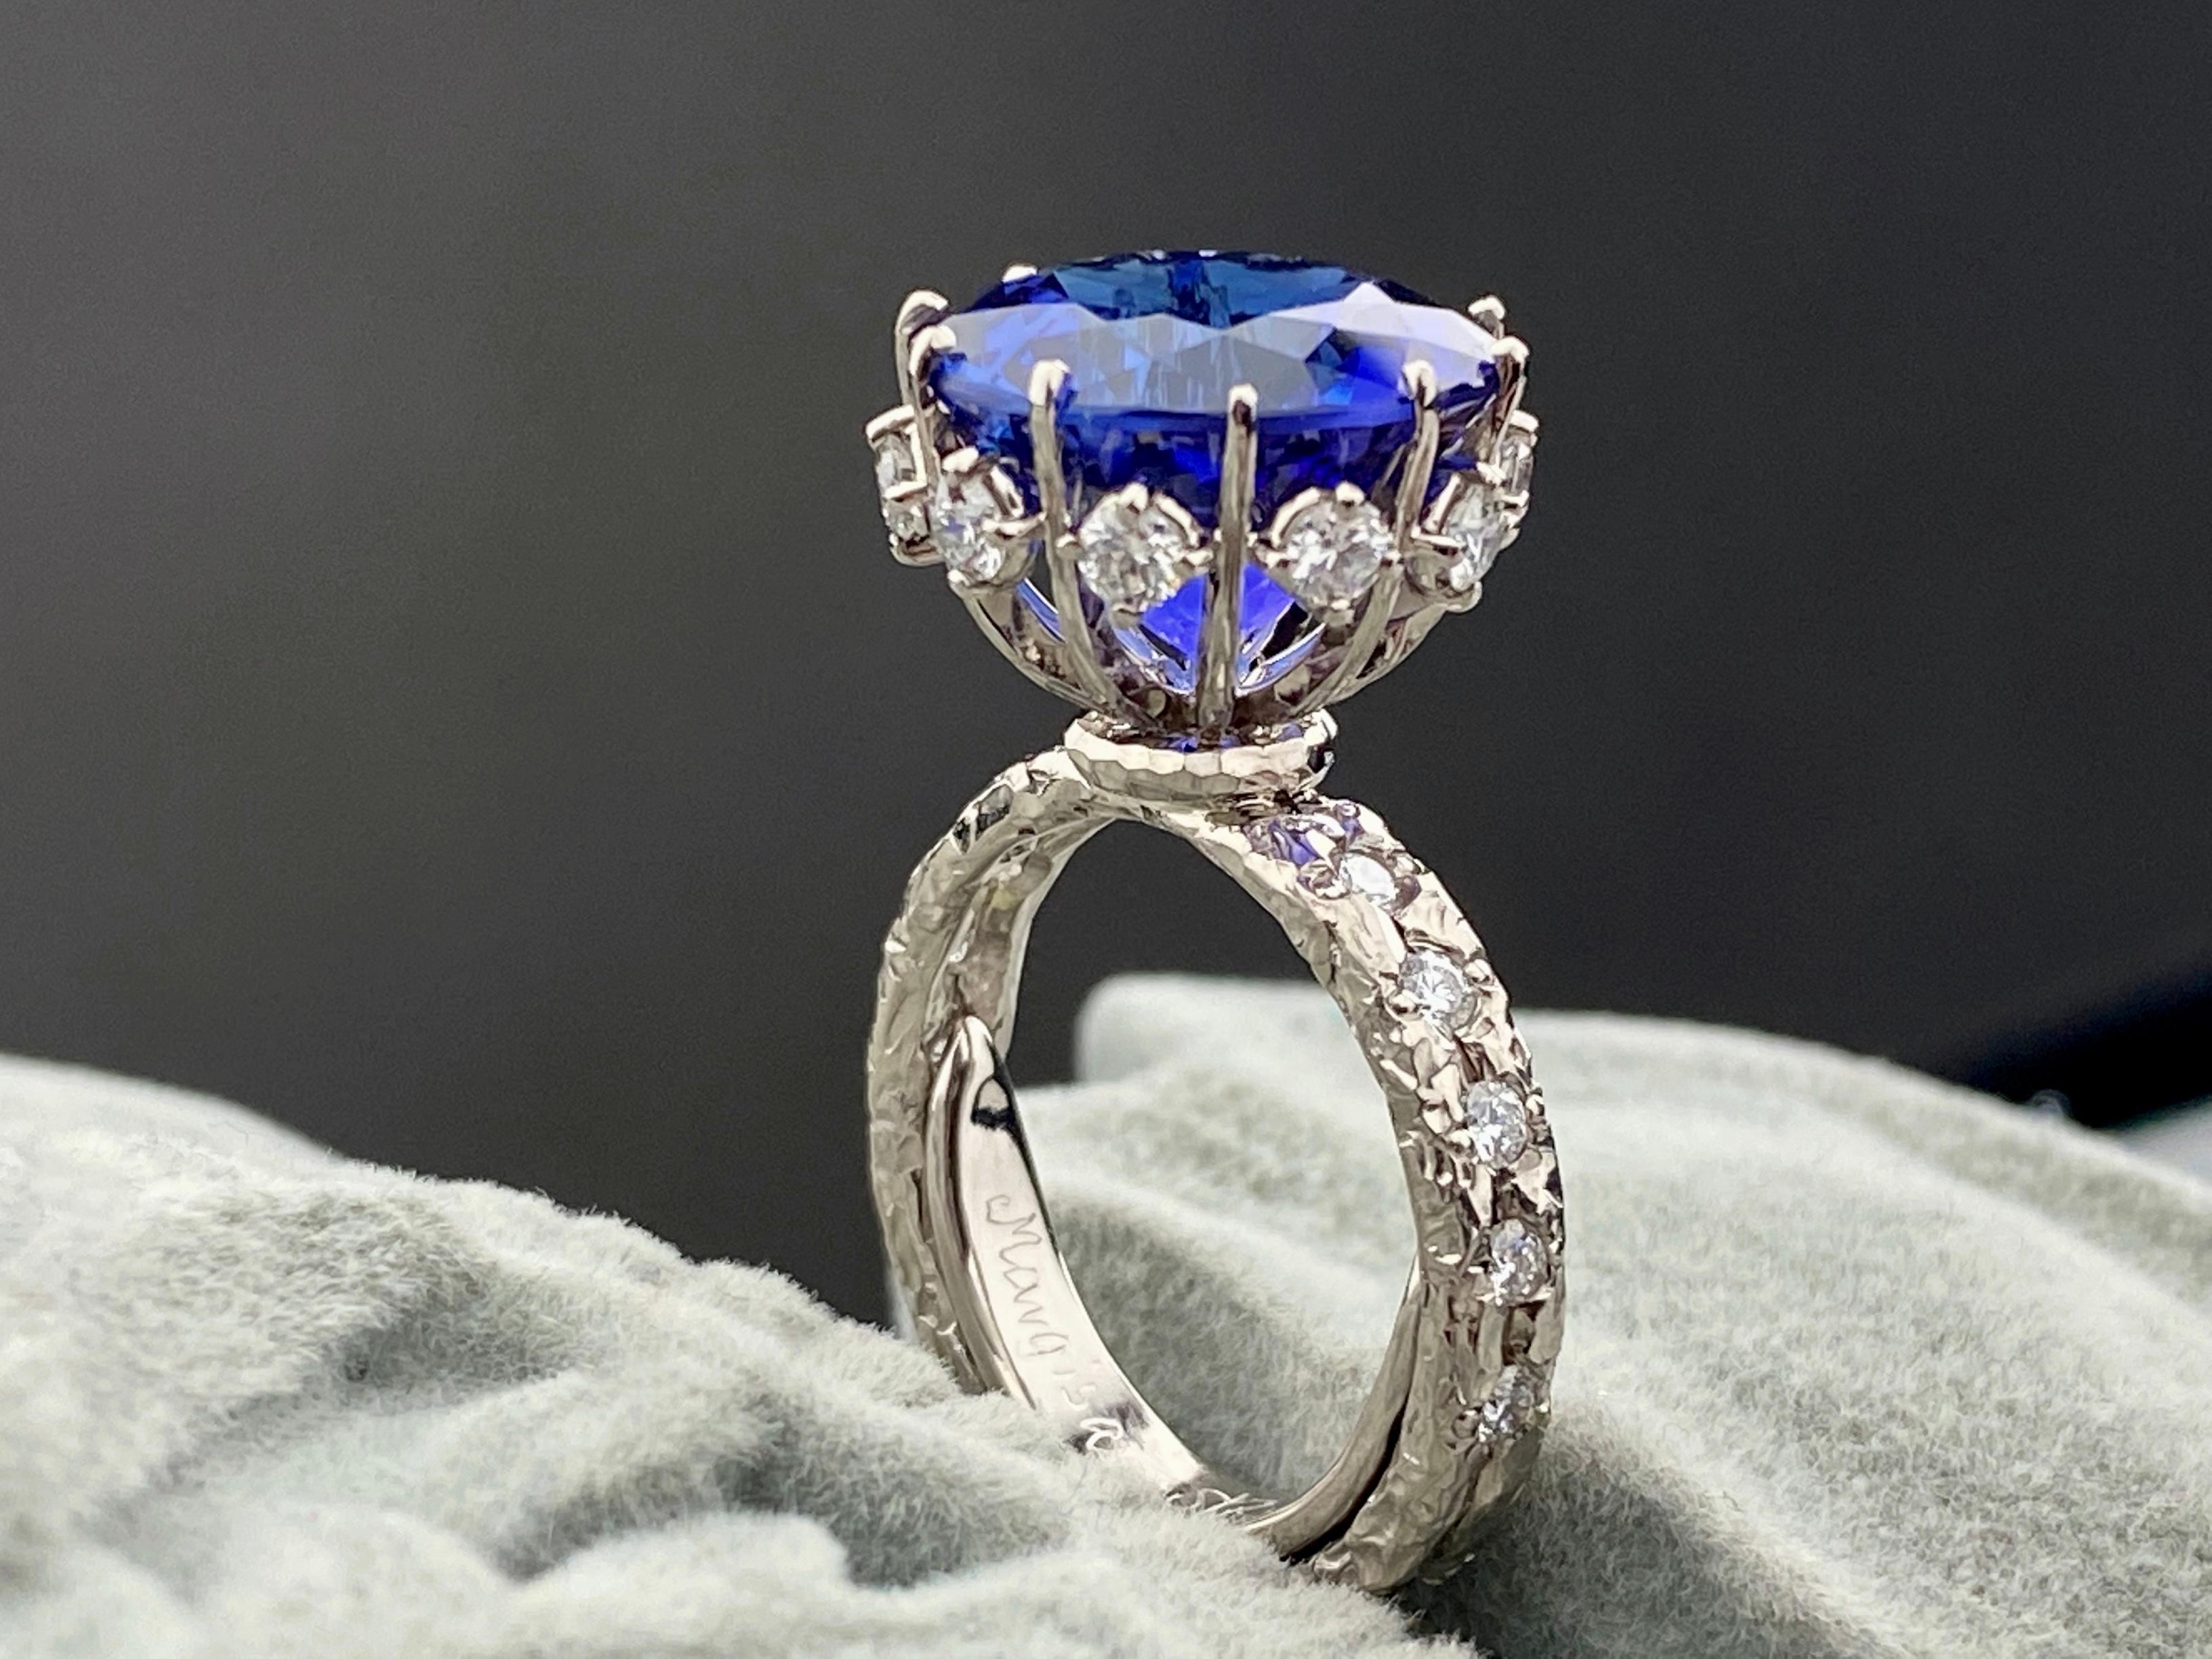 Here is absoluttelly top 10,97ct Tanzanite ring made of 18kt white gold. The main gem is set in prongs of golden  basket with 10 pcs ø 2,5 VVS/G white diamonds. The basket is putted on the band decorated with another 10 pcs ø 2,0 SI/H white